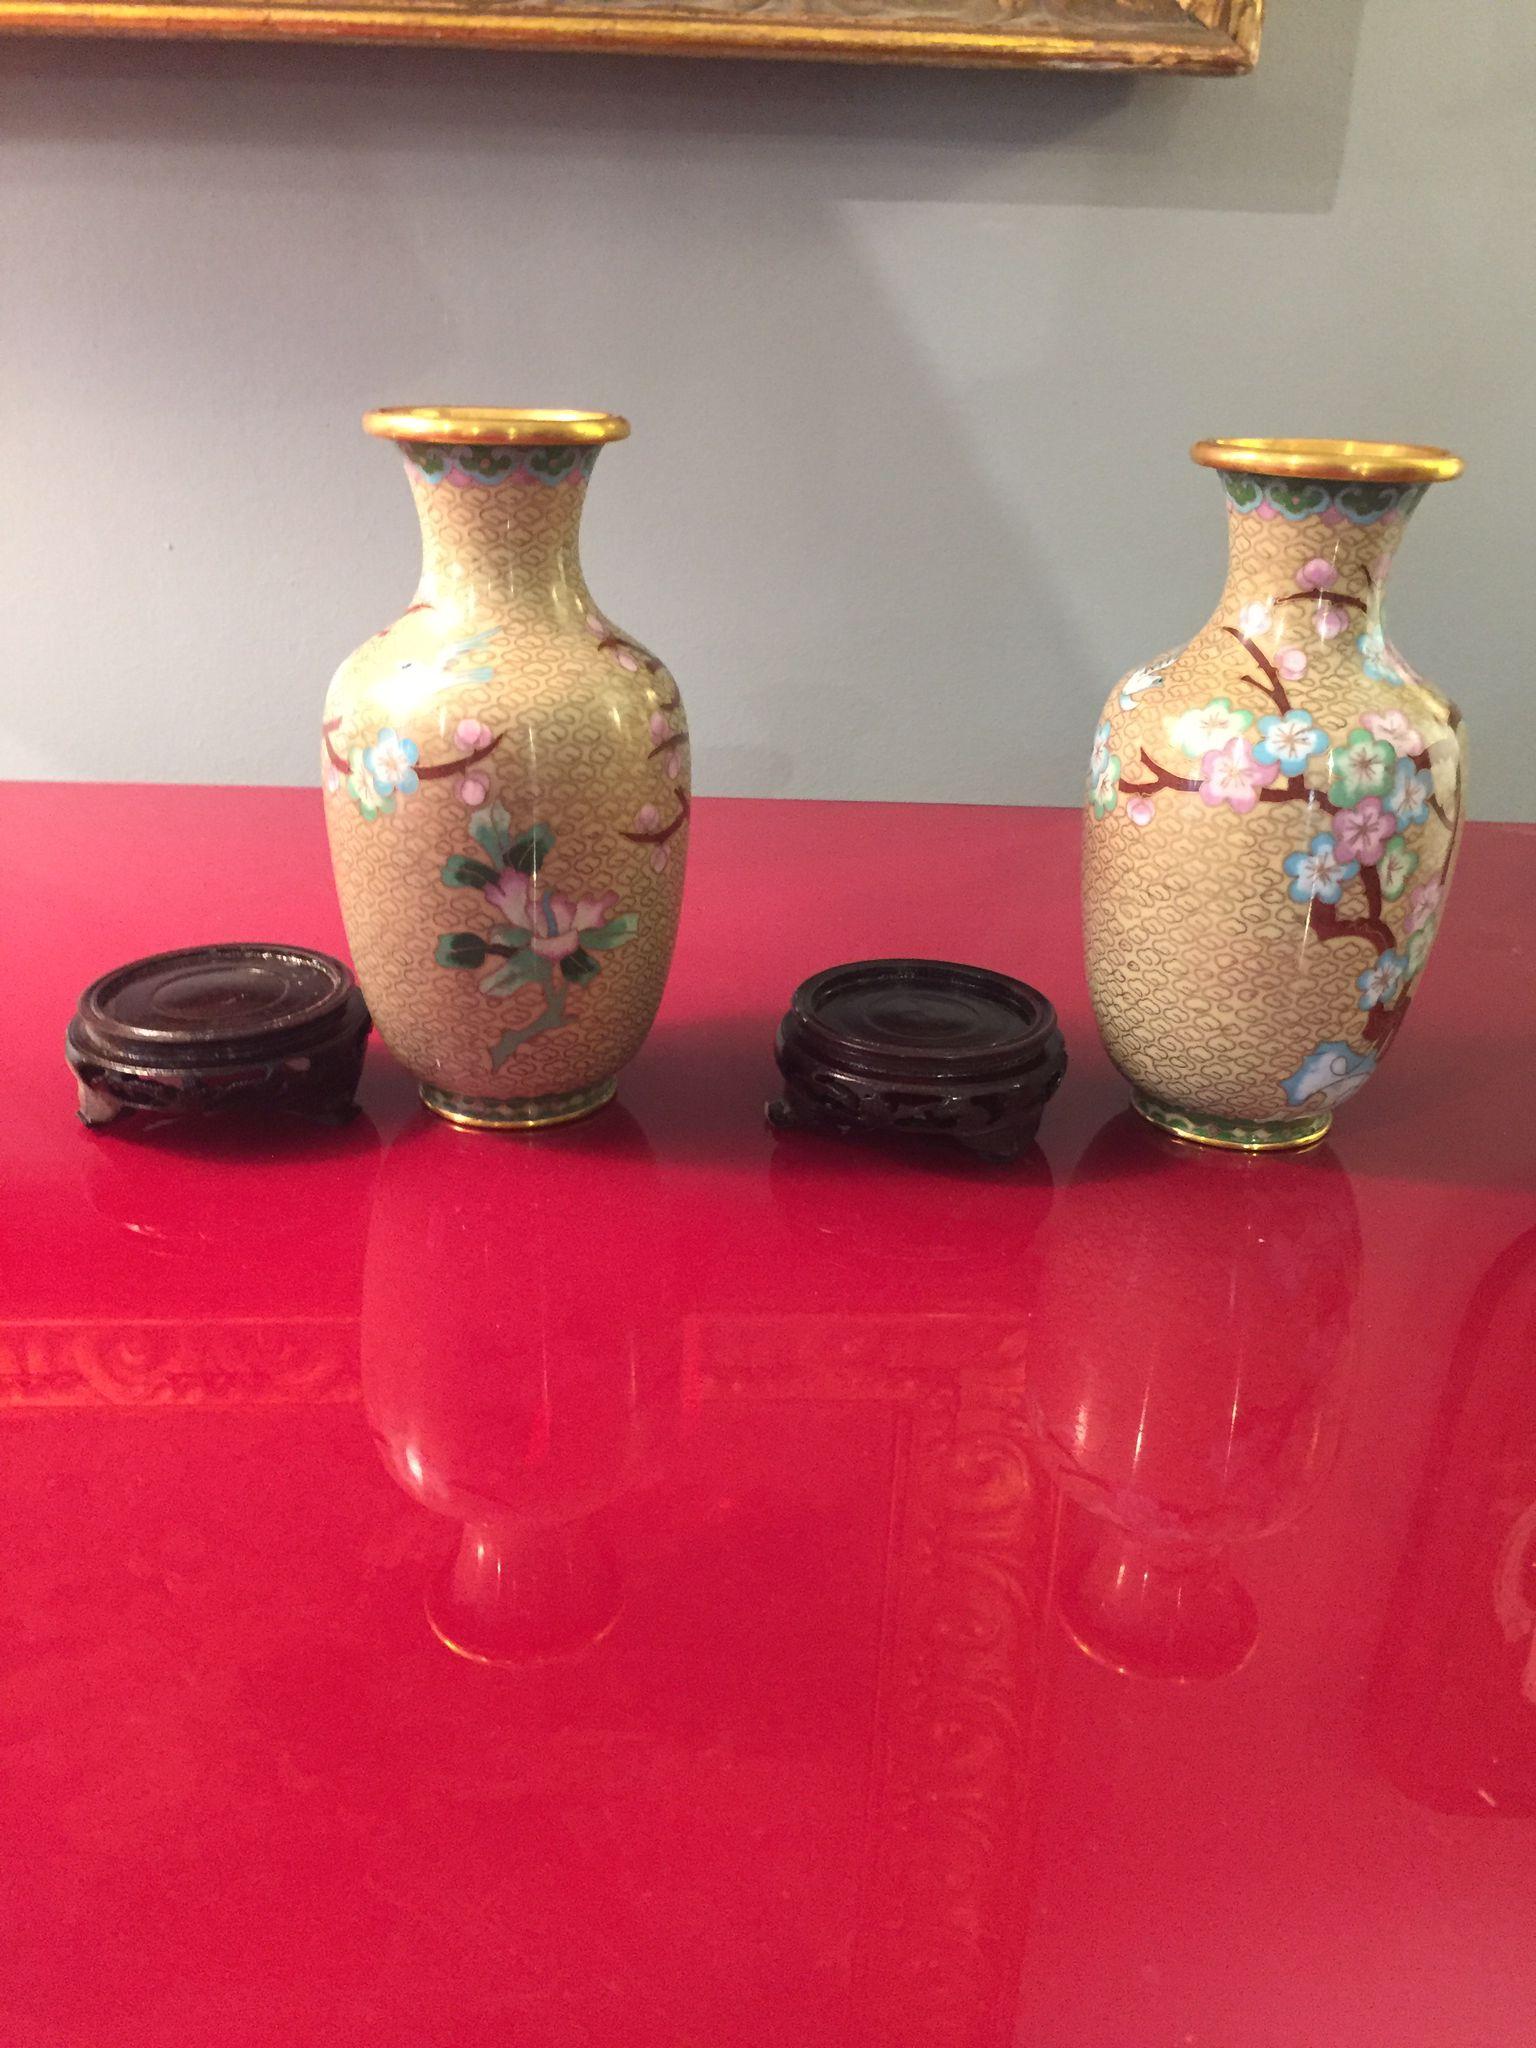 Pair of Chinese Cloisonné vases, Enamelled and gilded, early 20th century, with original box.
China, early 20th century.
Excellent condition for this pair of enameled and gilded cloisonné vases with floral motifs.